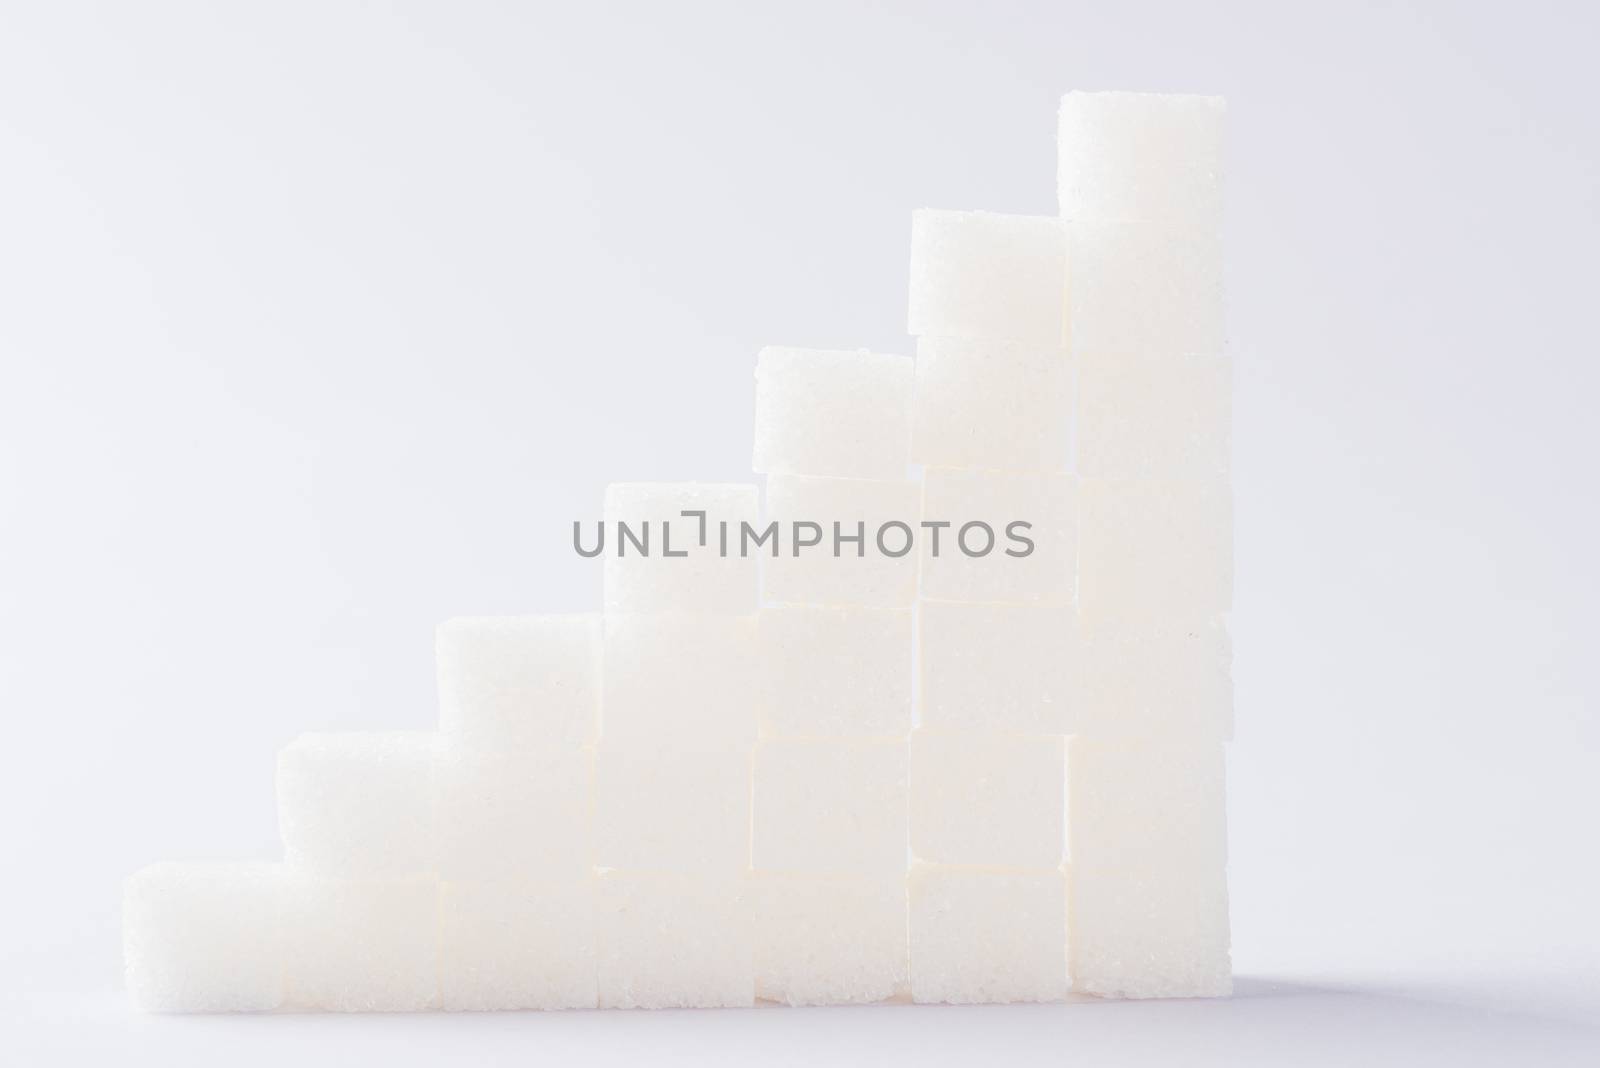 Ascending stacks of sugar cubes graph chart, studio shot isolated on white background, health high blood risk of diabetes concept